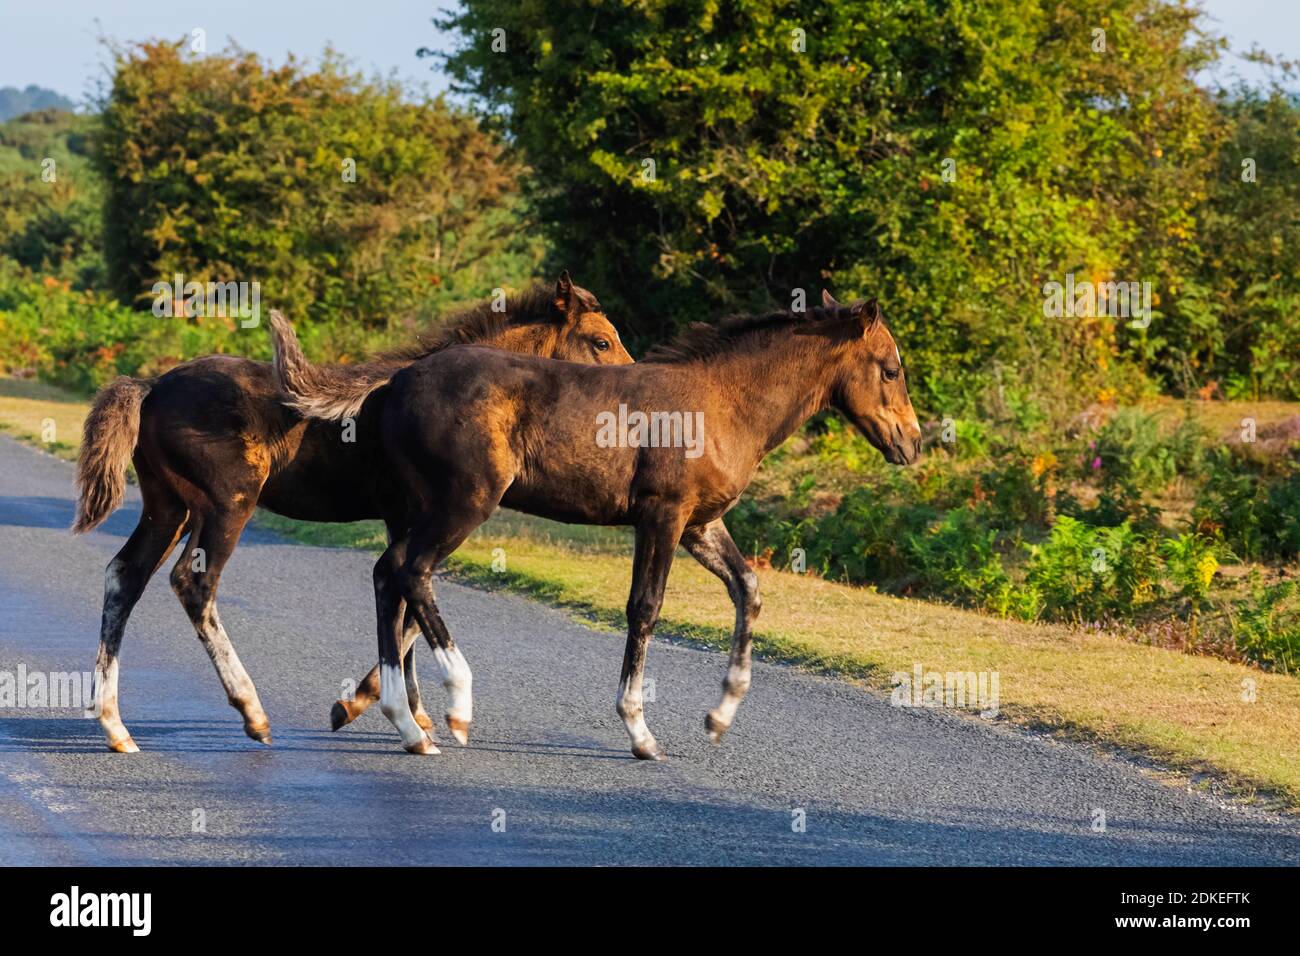 England, Hampshire, New Forest, Ponies Crossing Road near Lyndhurst Stock Photo